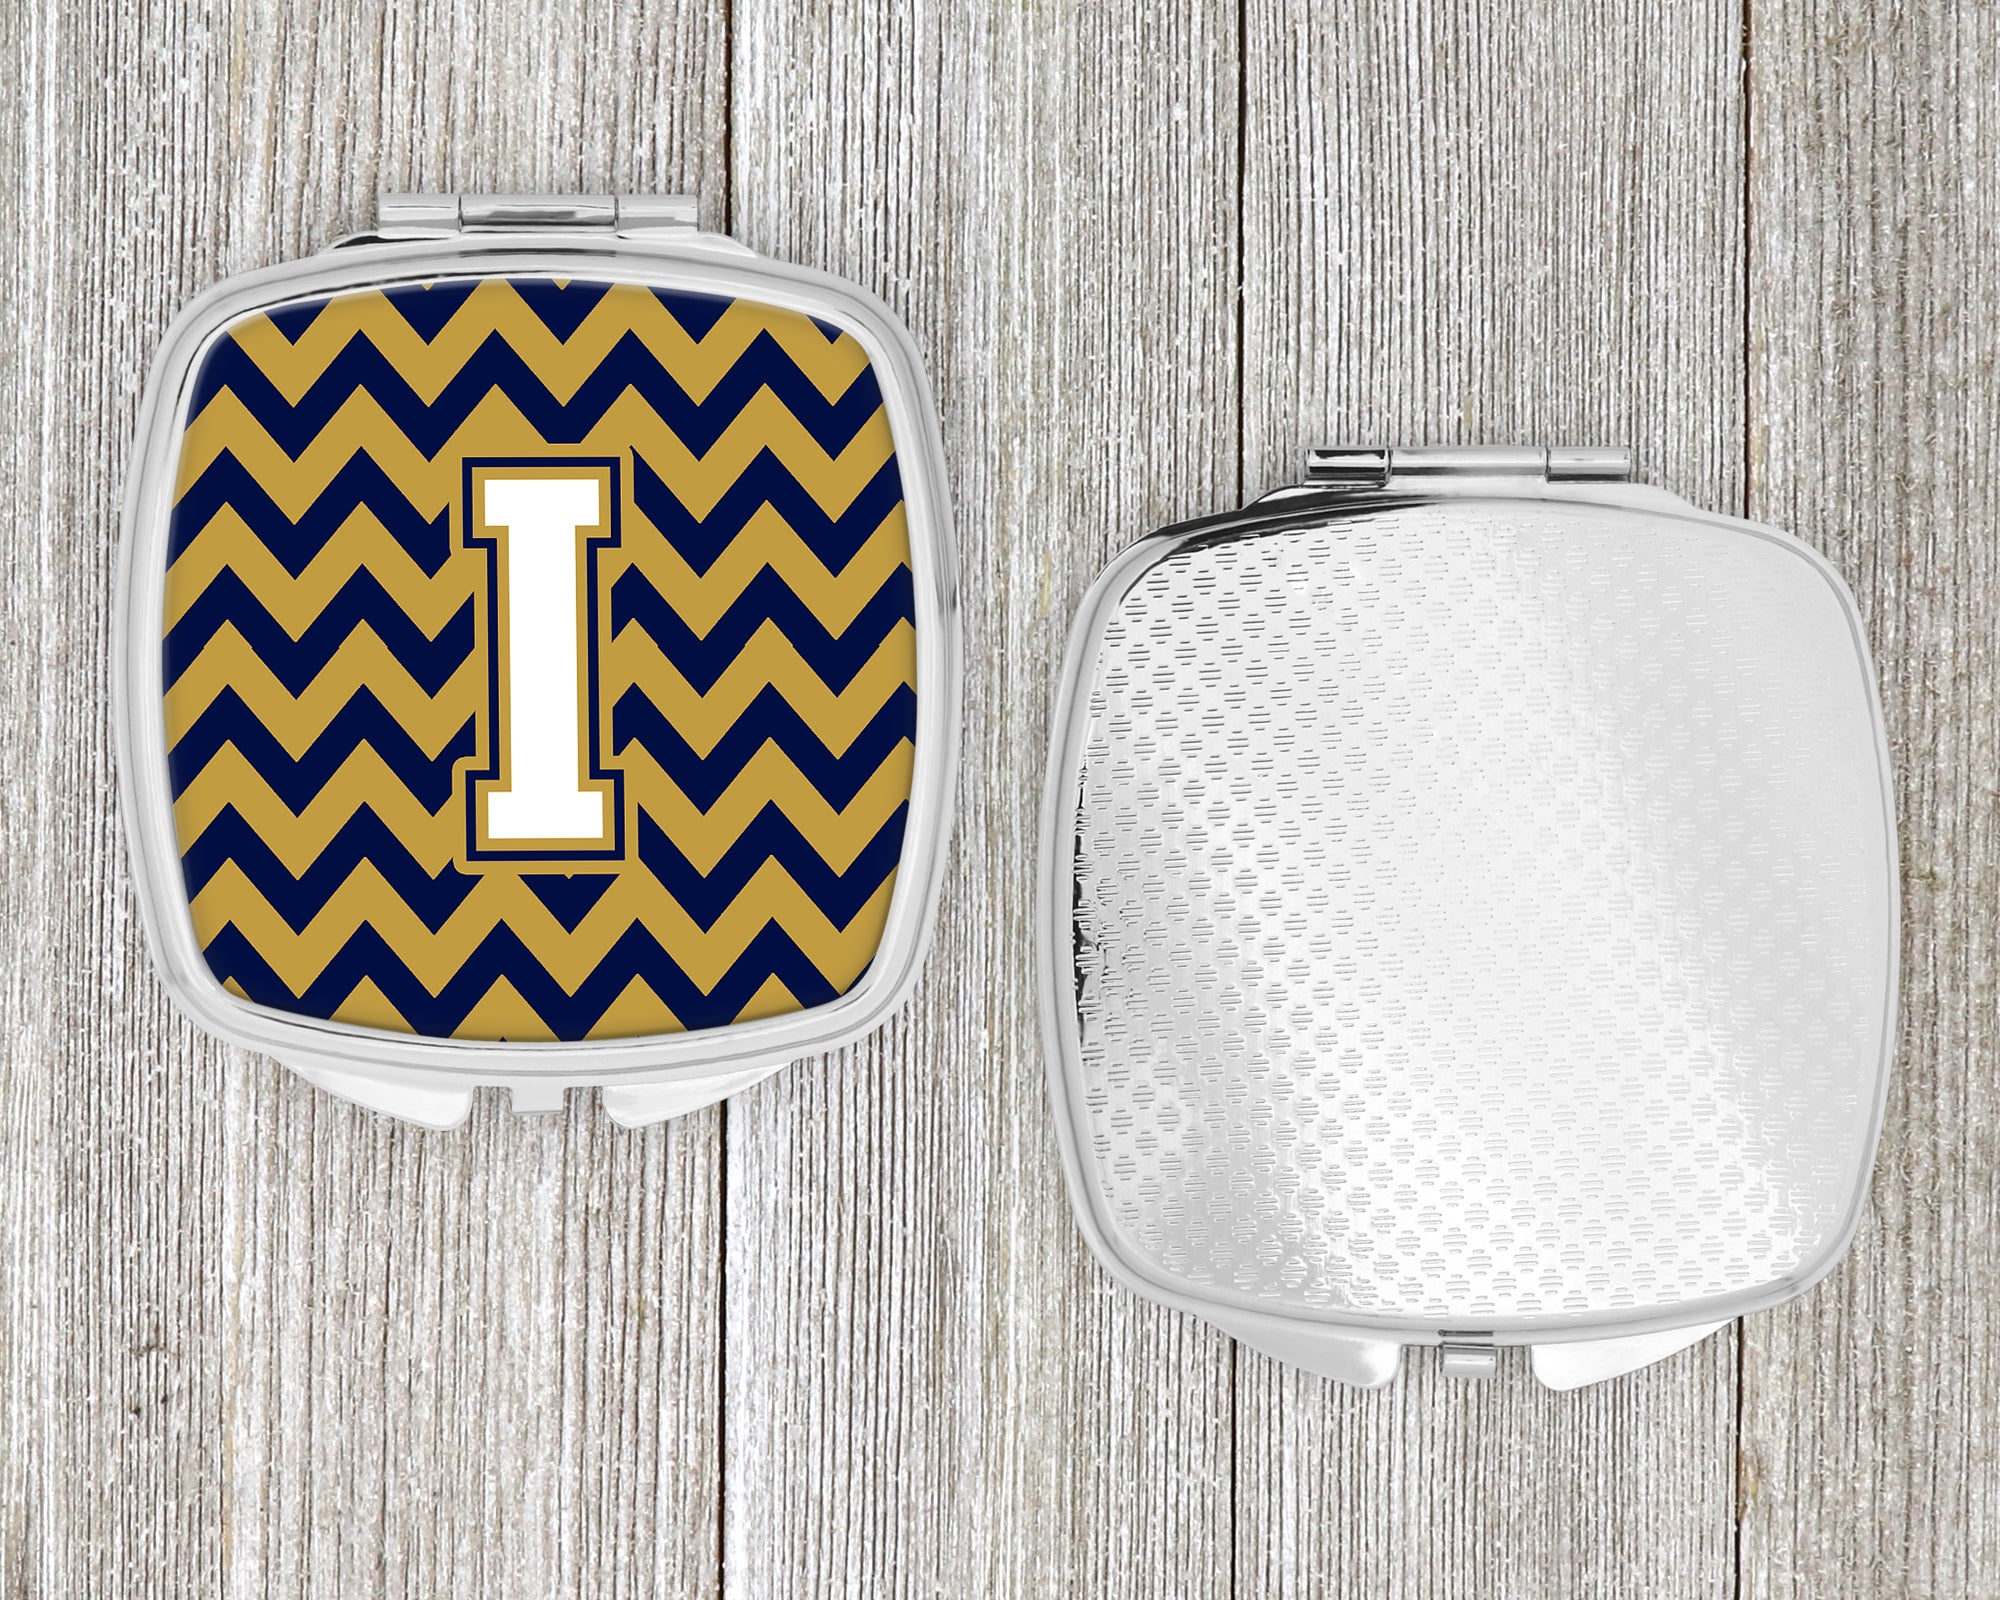 Letter I Chevron Navy Blue and Gold Compact Mirror CJ1057-ISCM